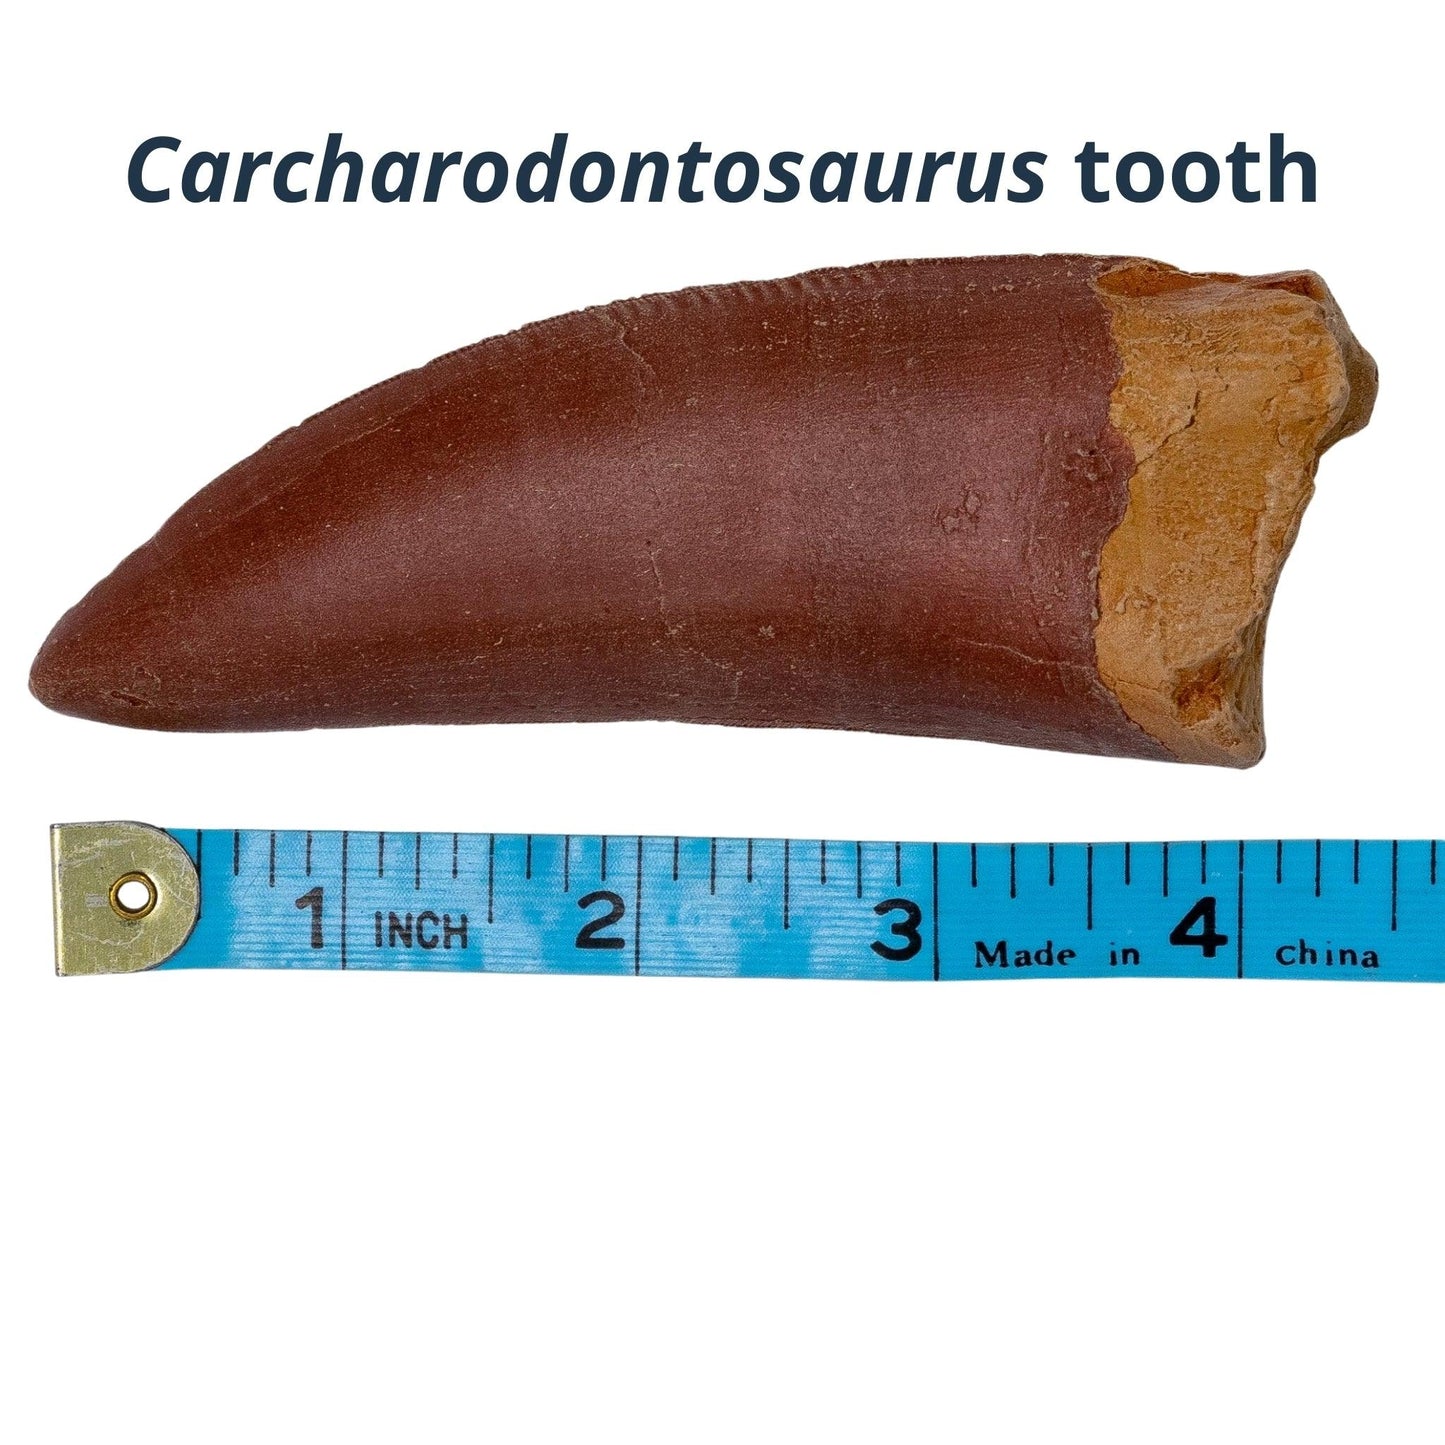 Mesozoic Monsters Crate : Carcharodontosaurus tooth cast